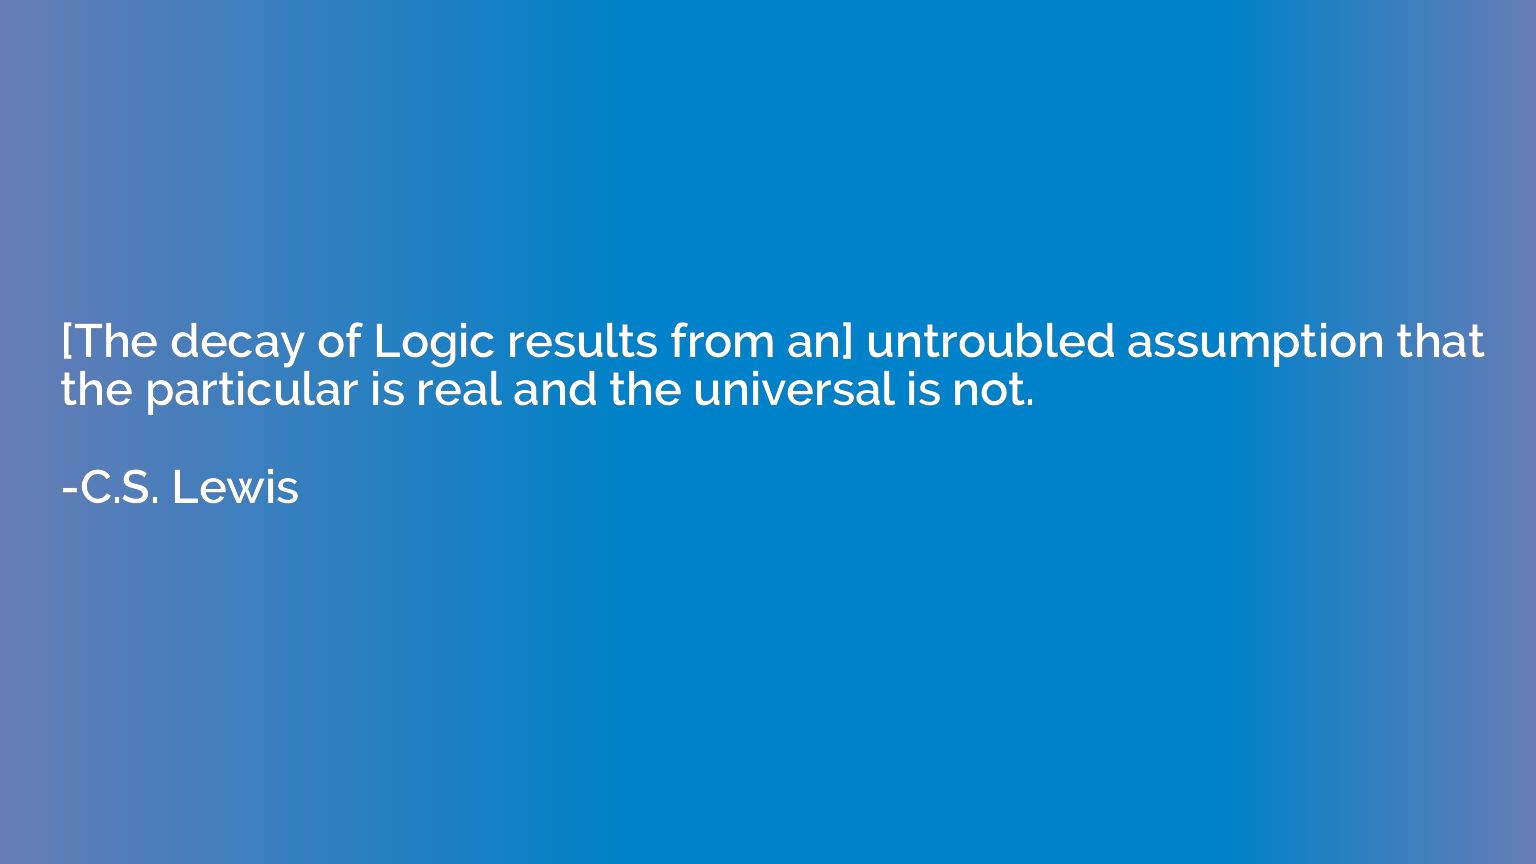 [The decay of Logic results from an] untroubled assumption t